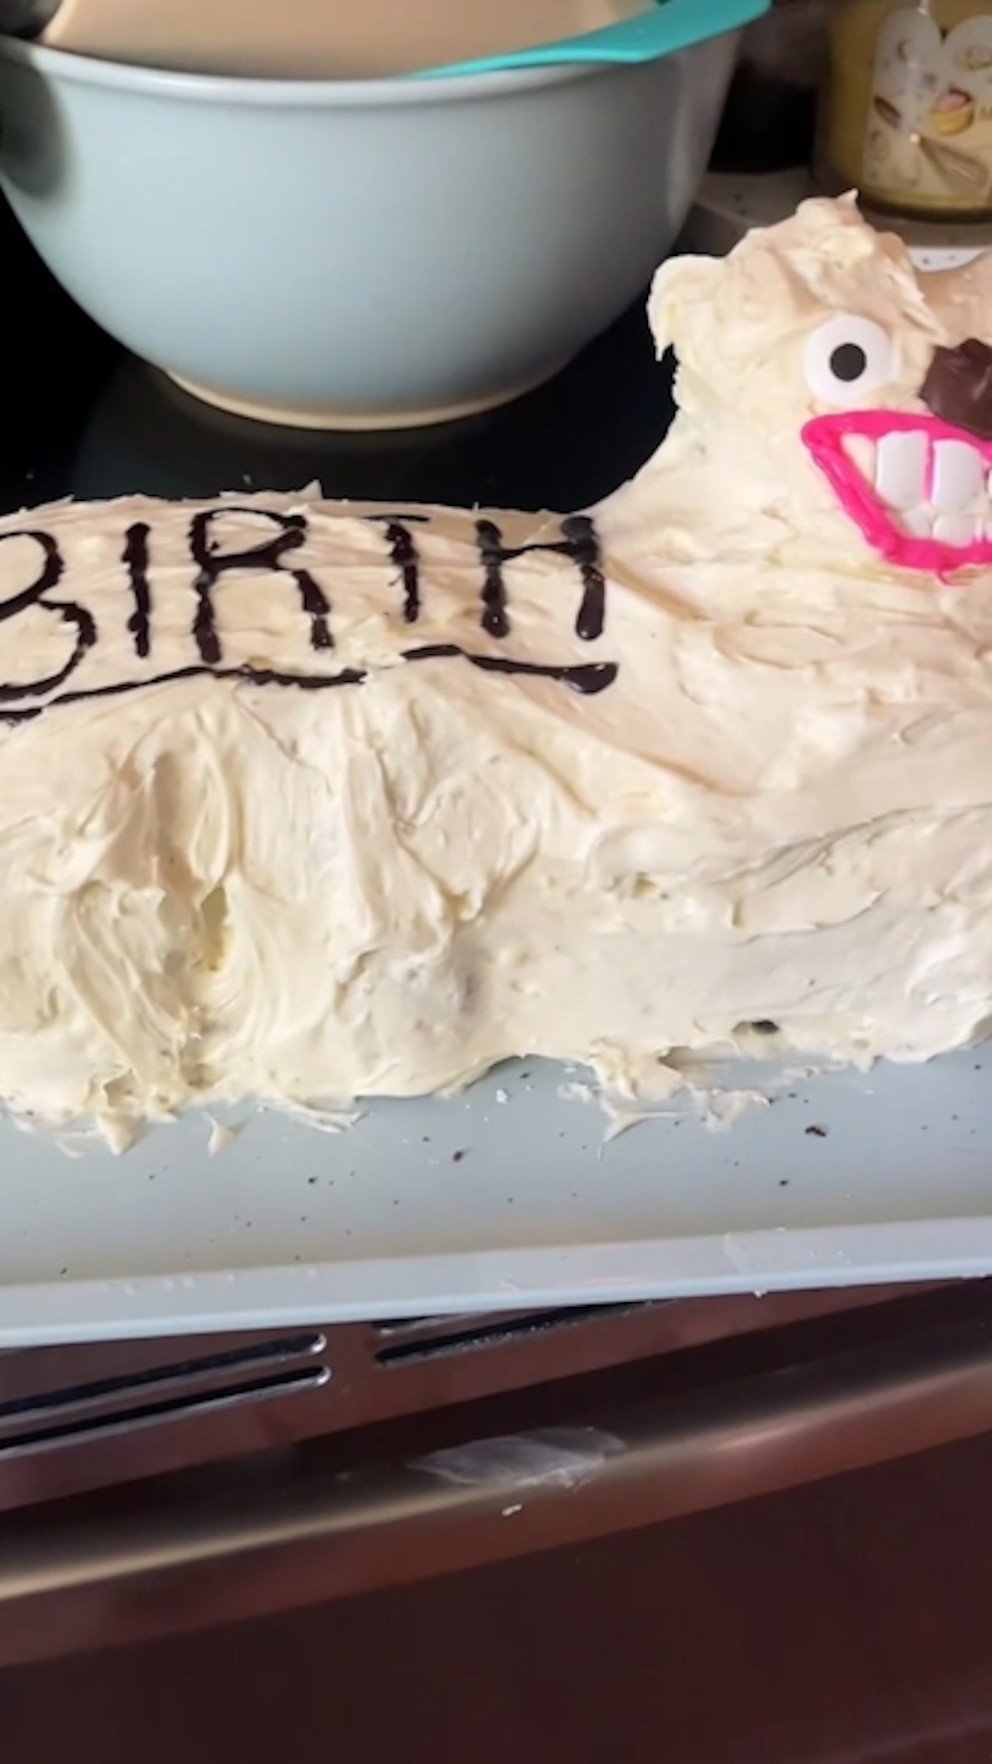 WATCH: Mom shows off well-meaning but terrifying birthday cake